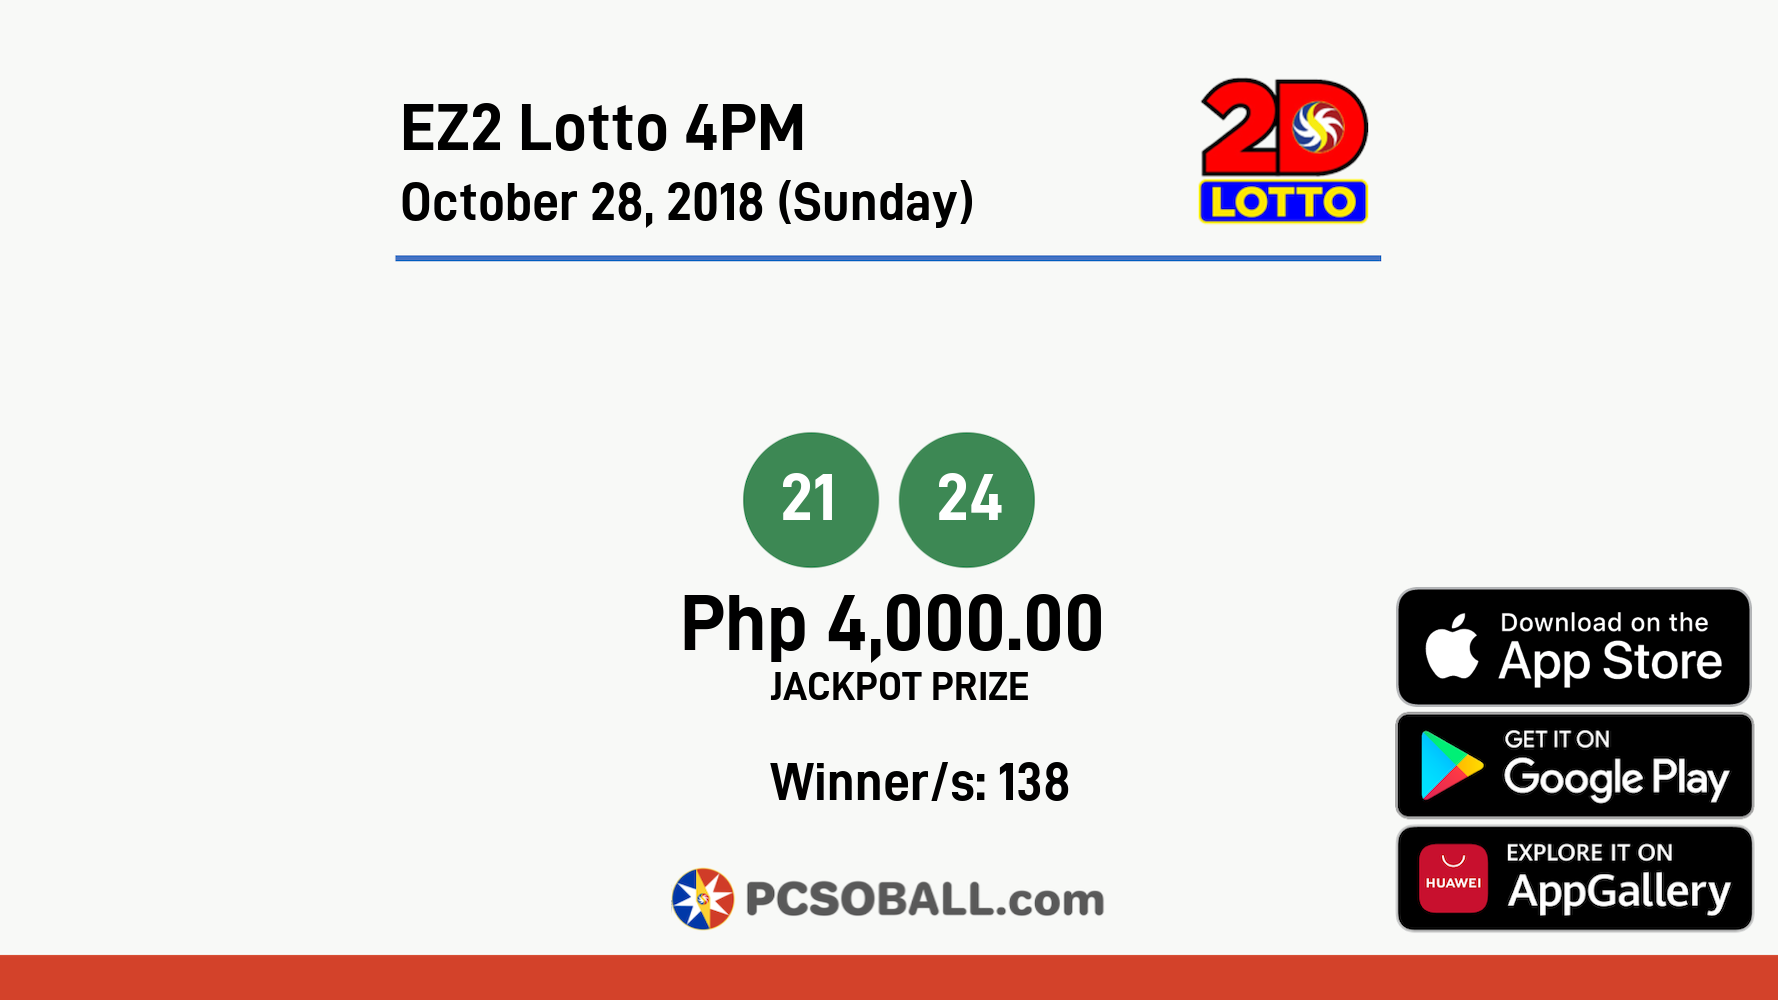 EZ2 Lotto 4PM October 28, 2018 (Sunday) Result